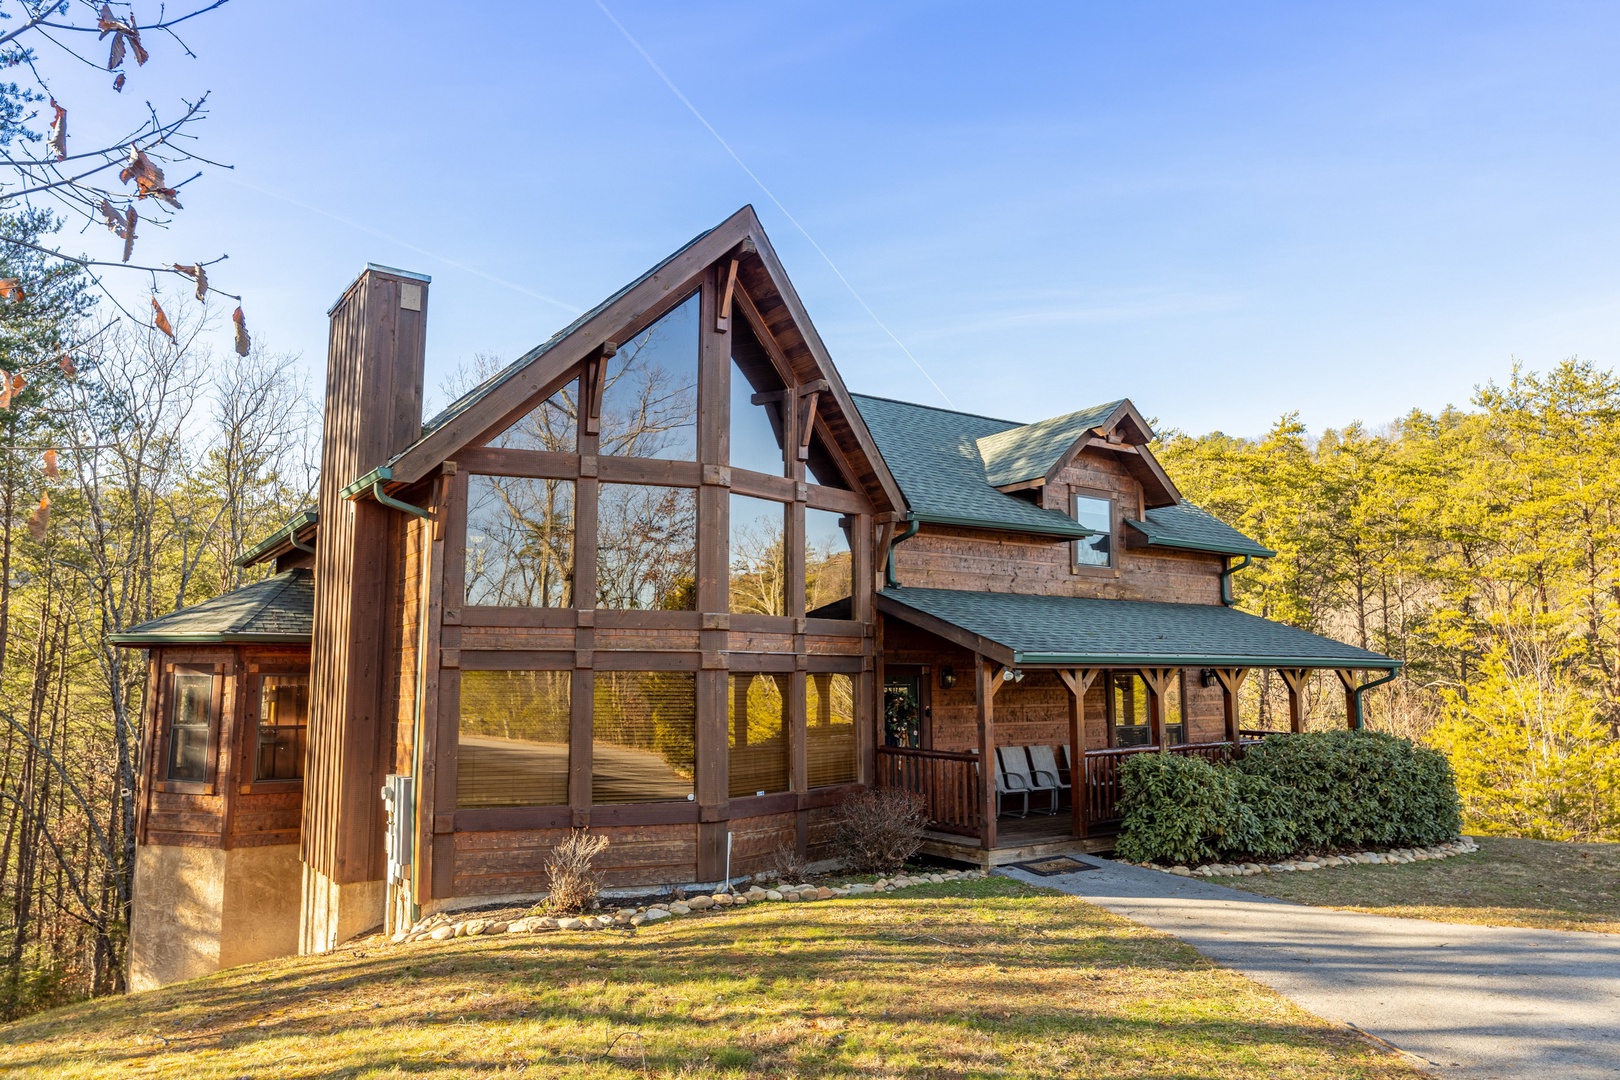 King of the Mountain, a 3 bedroom cabin rental located in Pigeon Forge